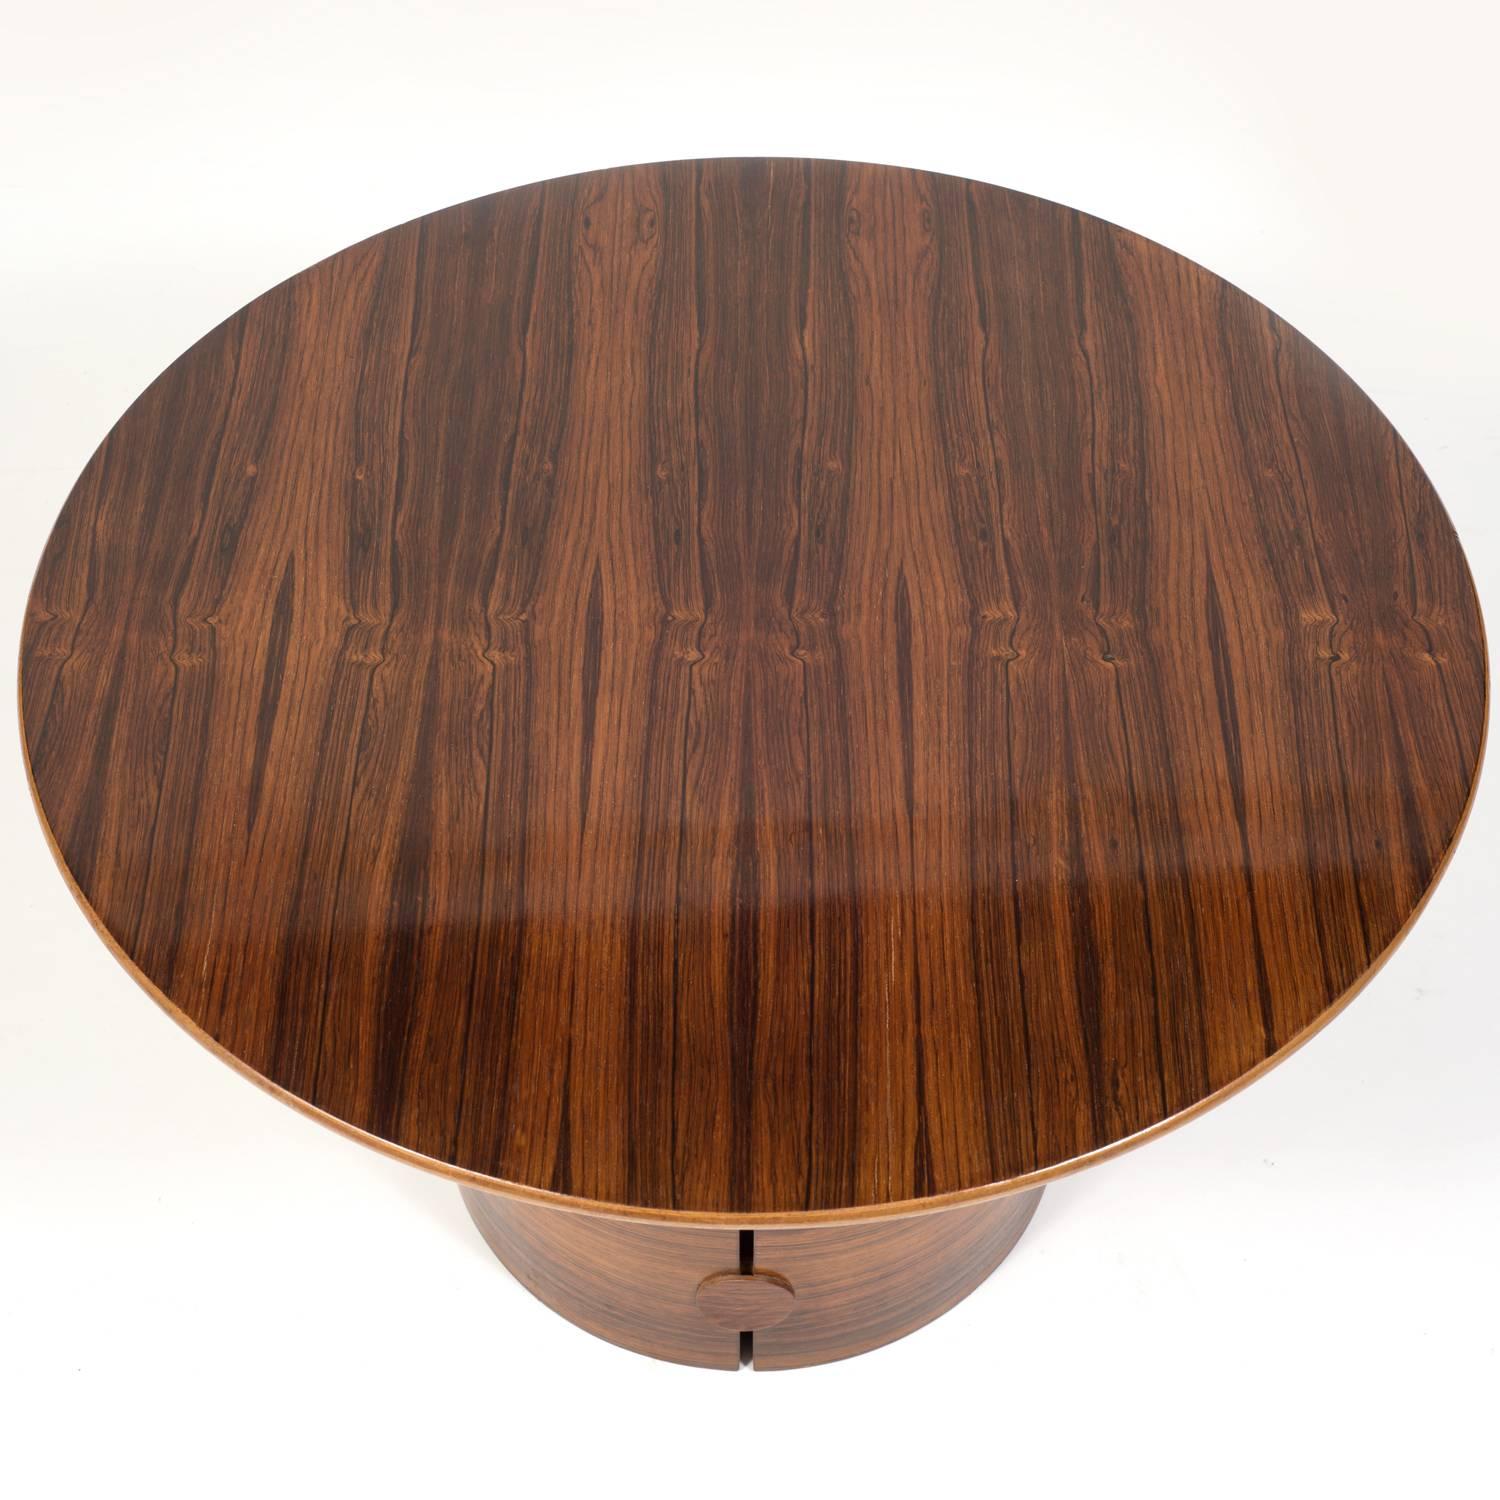 A rare and unusual coffee or centre table design for Knoll. The table was made in two different heights, the model shown here is the higher of the two. This rosewood veneer edition is an extremely rare version as the design was previously only made